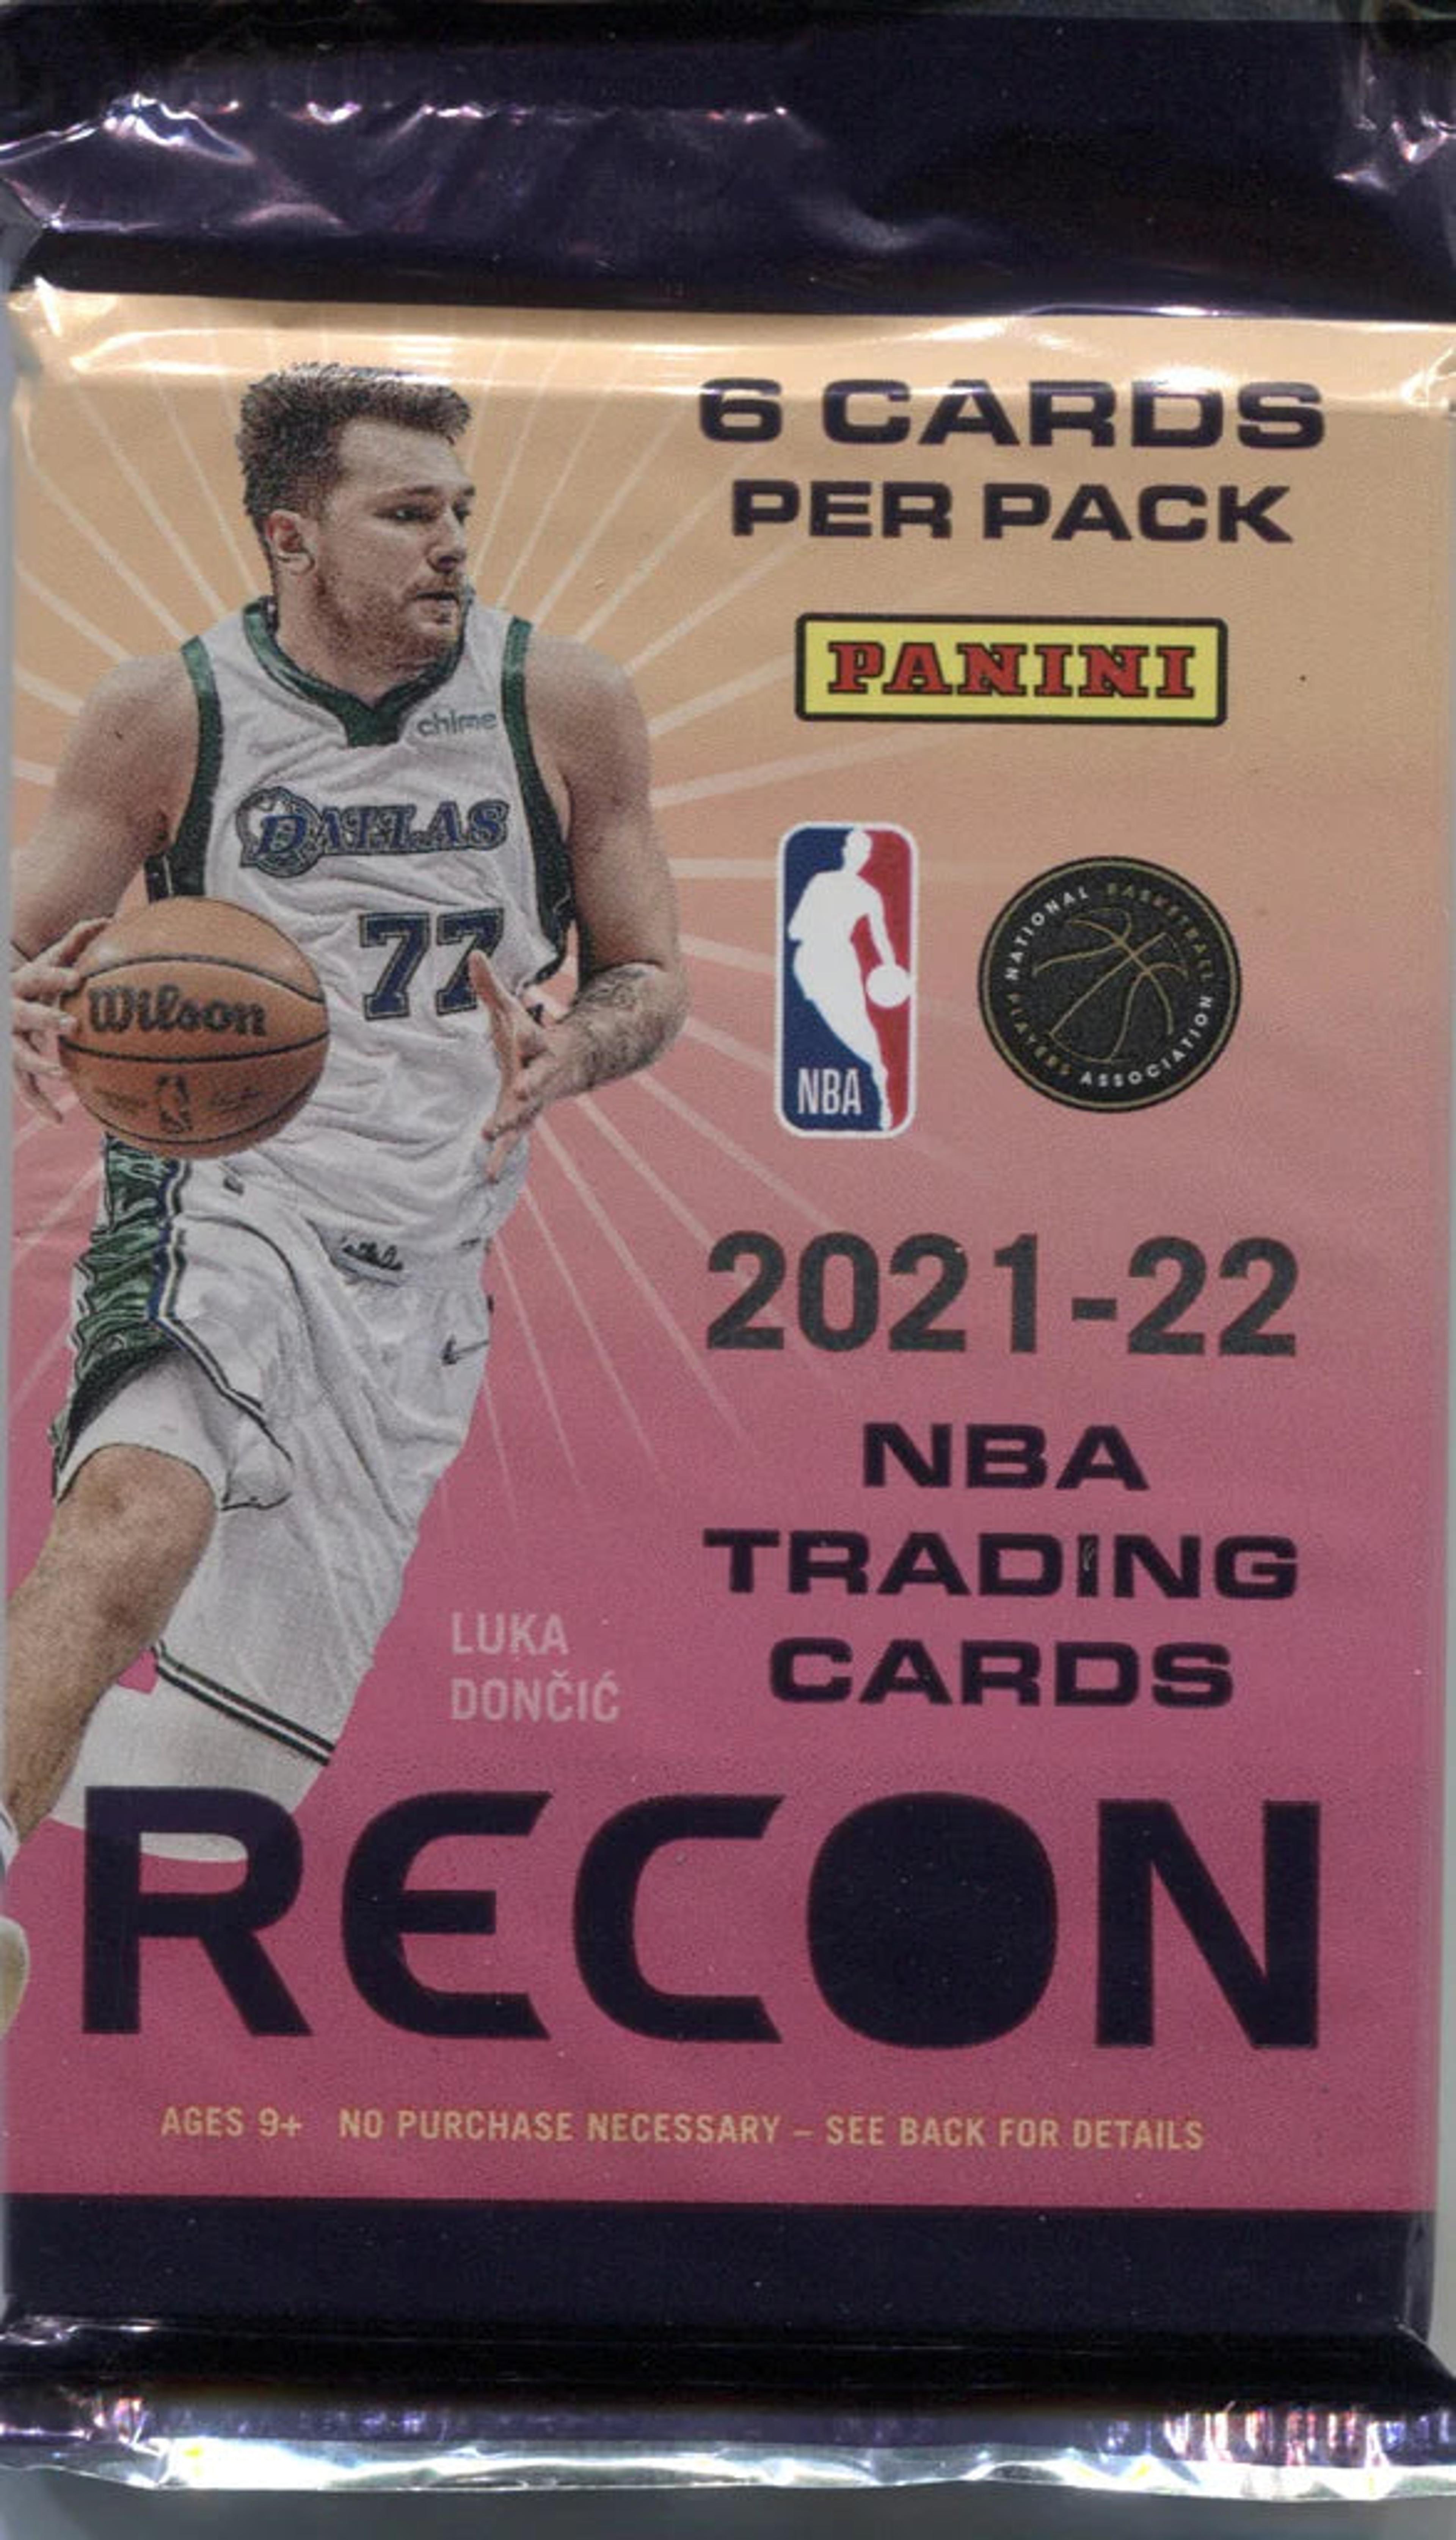 21/22 Recon Basketball Hobby Pack